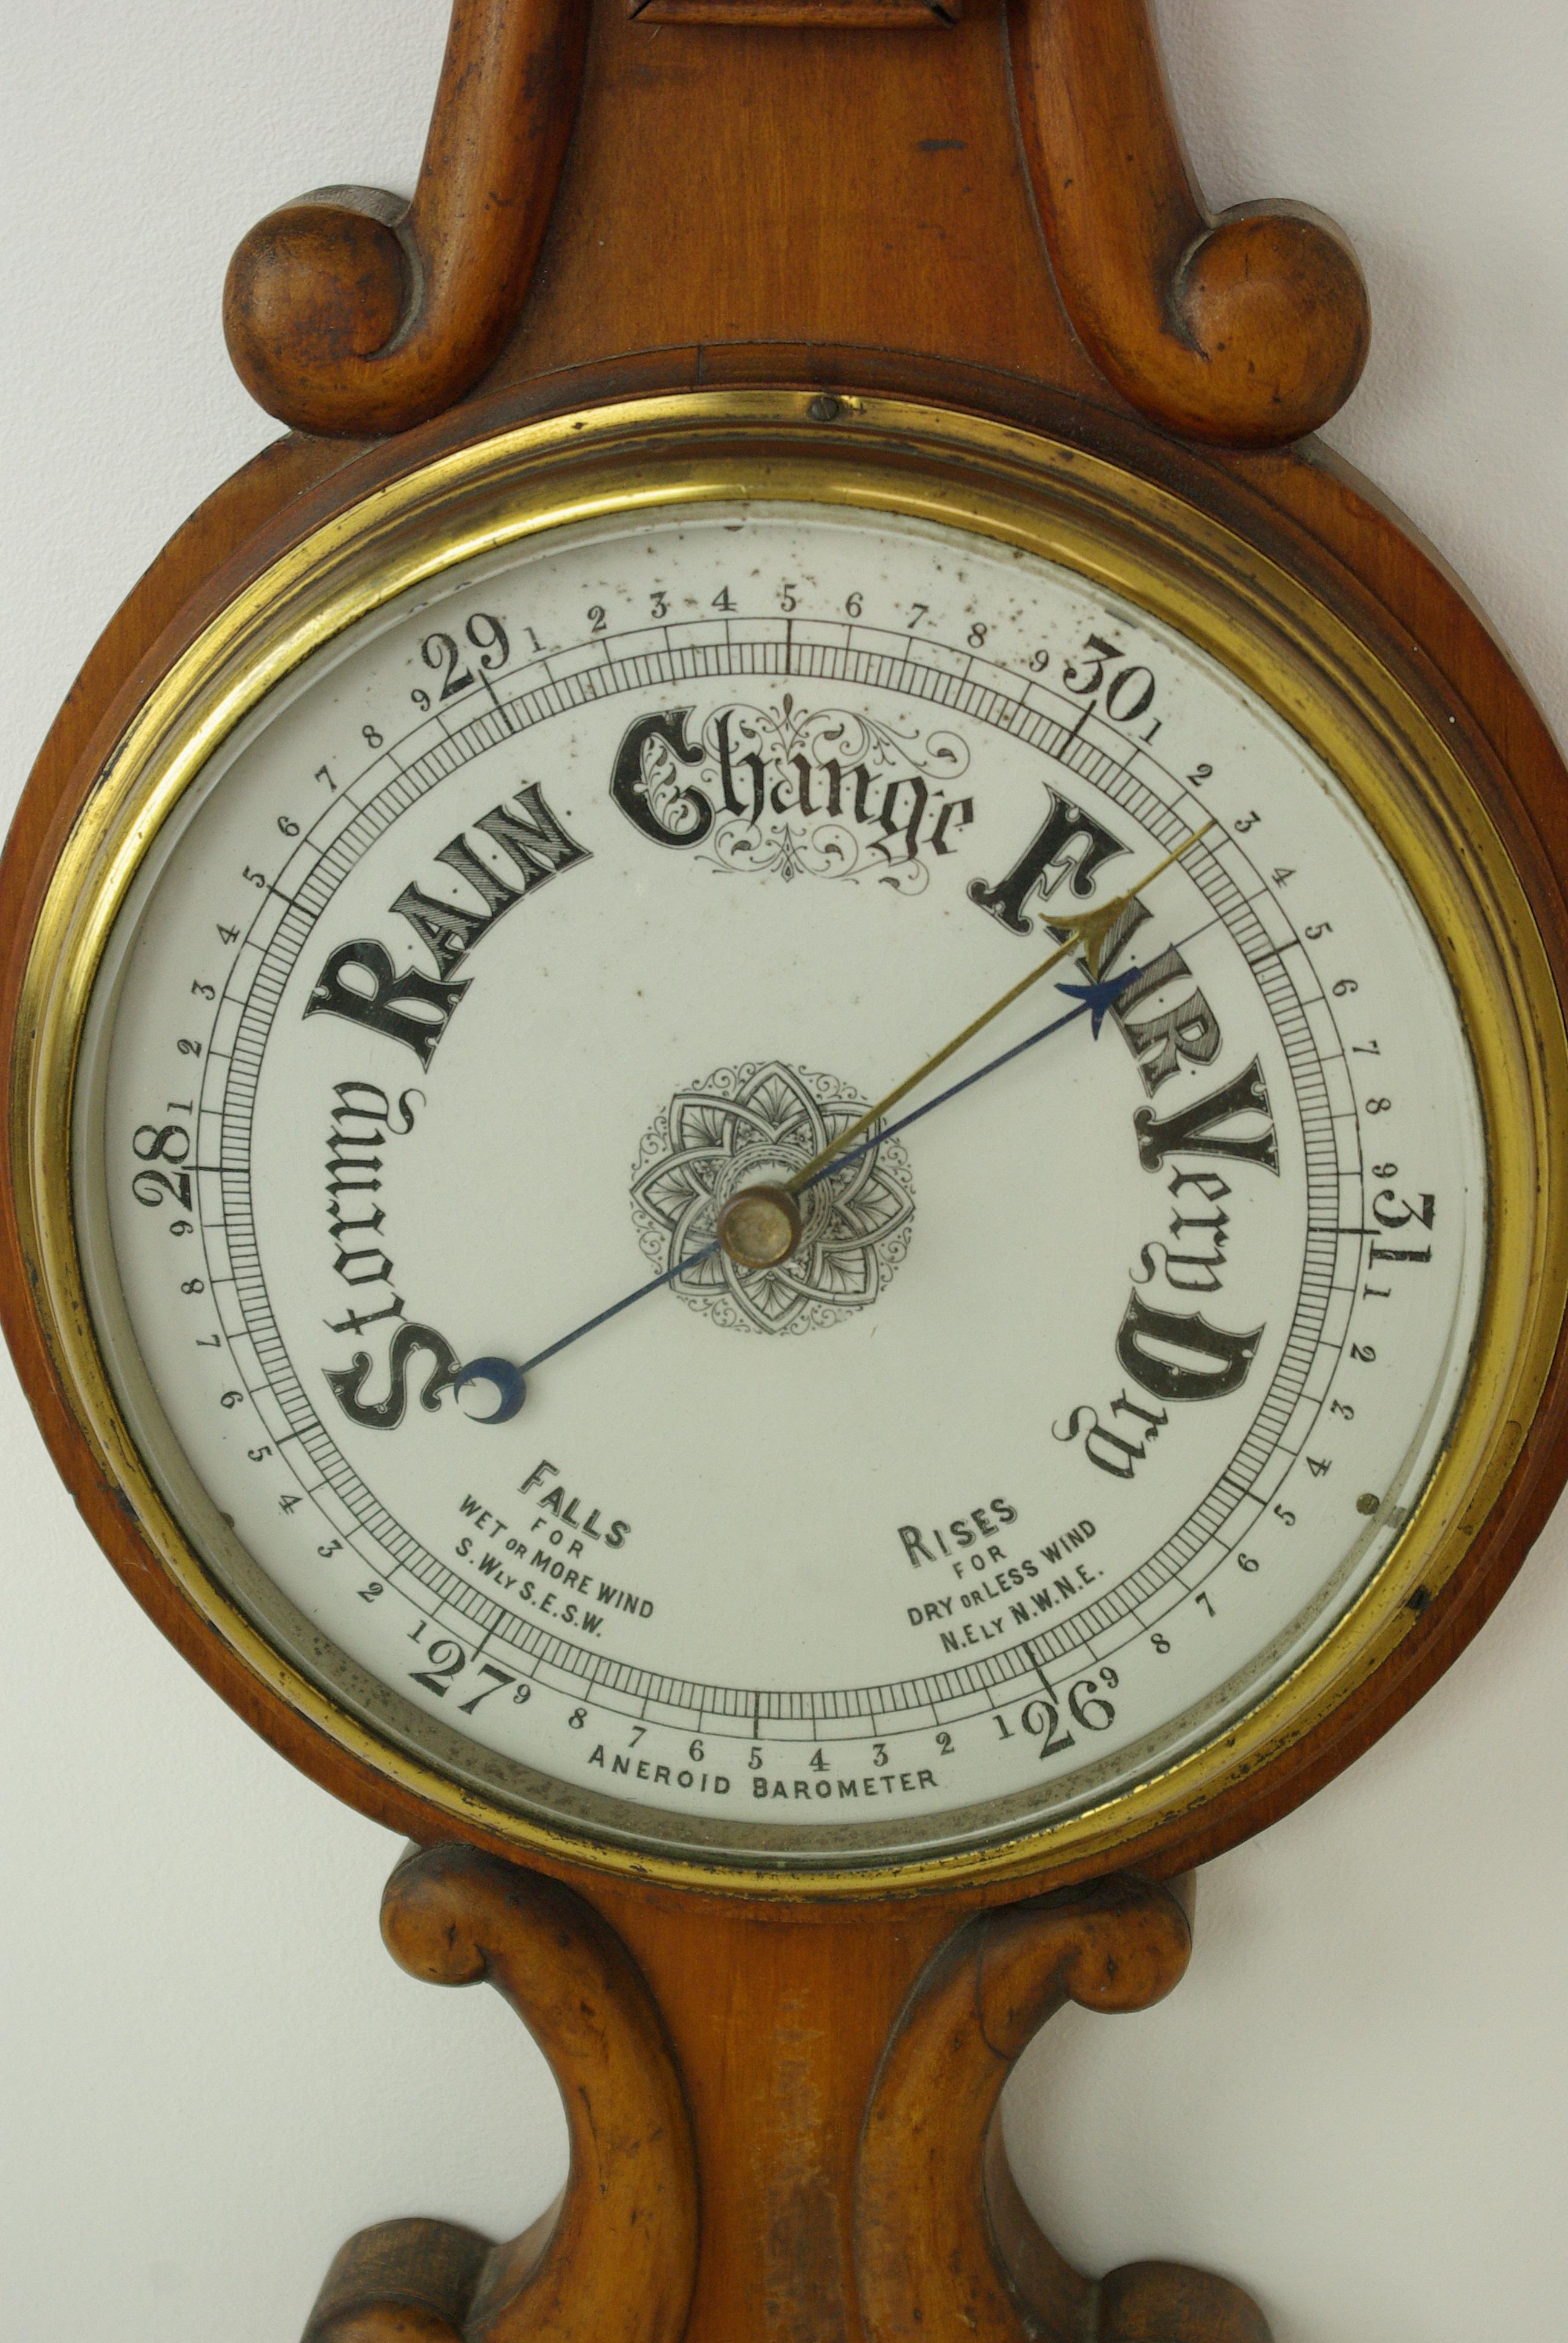 Antique Barometer, Aneroid barometer, decorative Barometer, carved walnut Barometer, Scotland, 1890, Antique Furniture, B1282A.

Scotland, 1880
Carved oak pediment top above
Thermometer below
Deep molded center circle into which barometer is